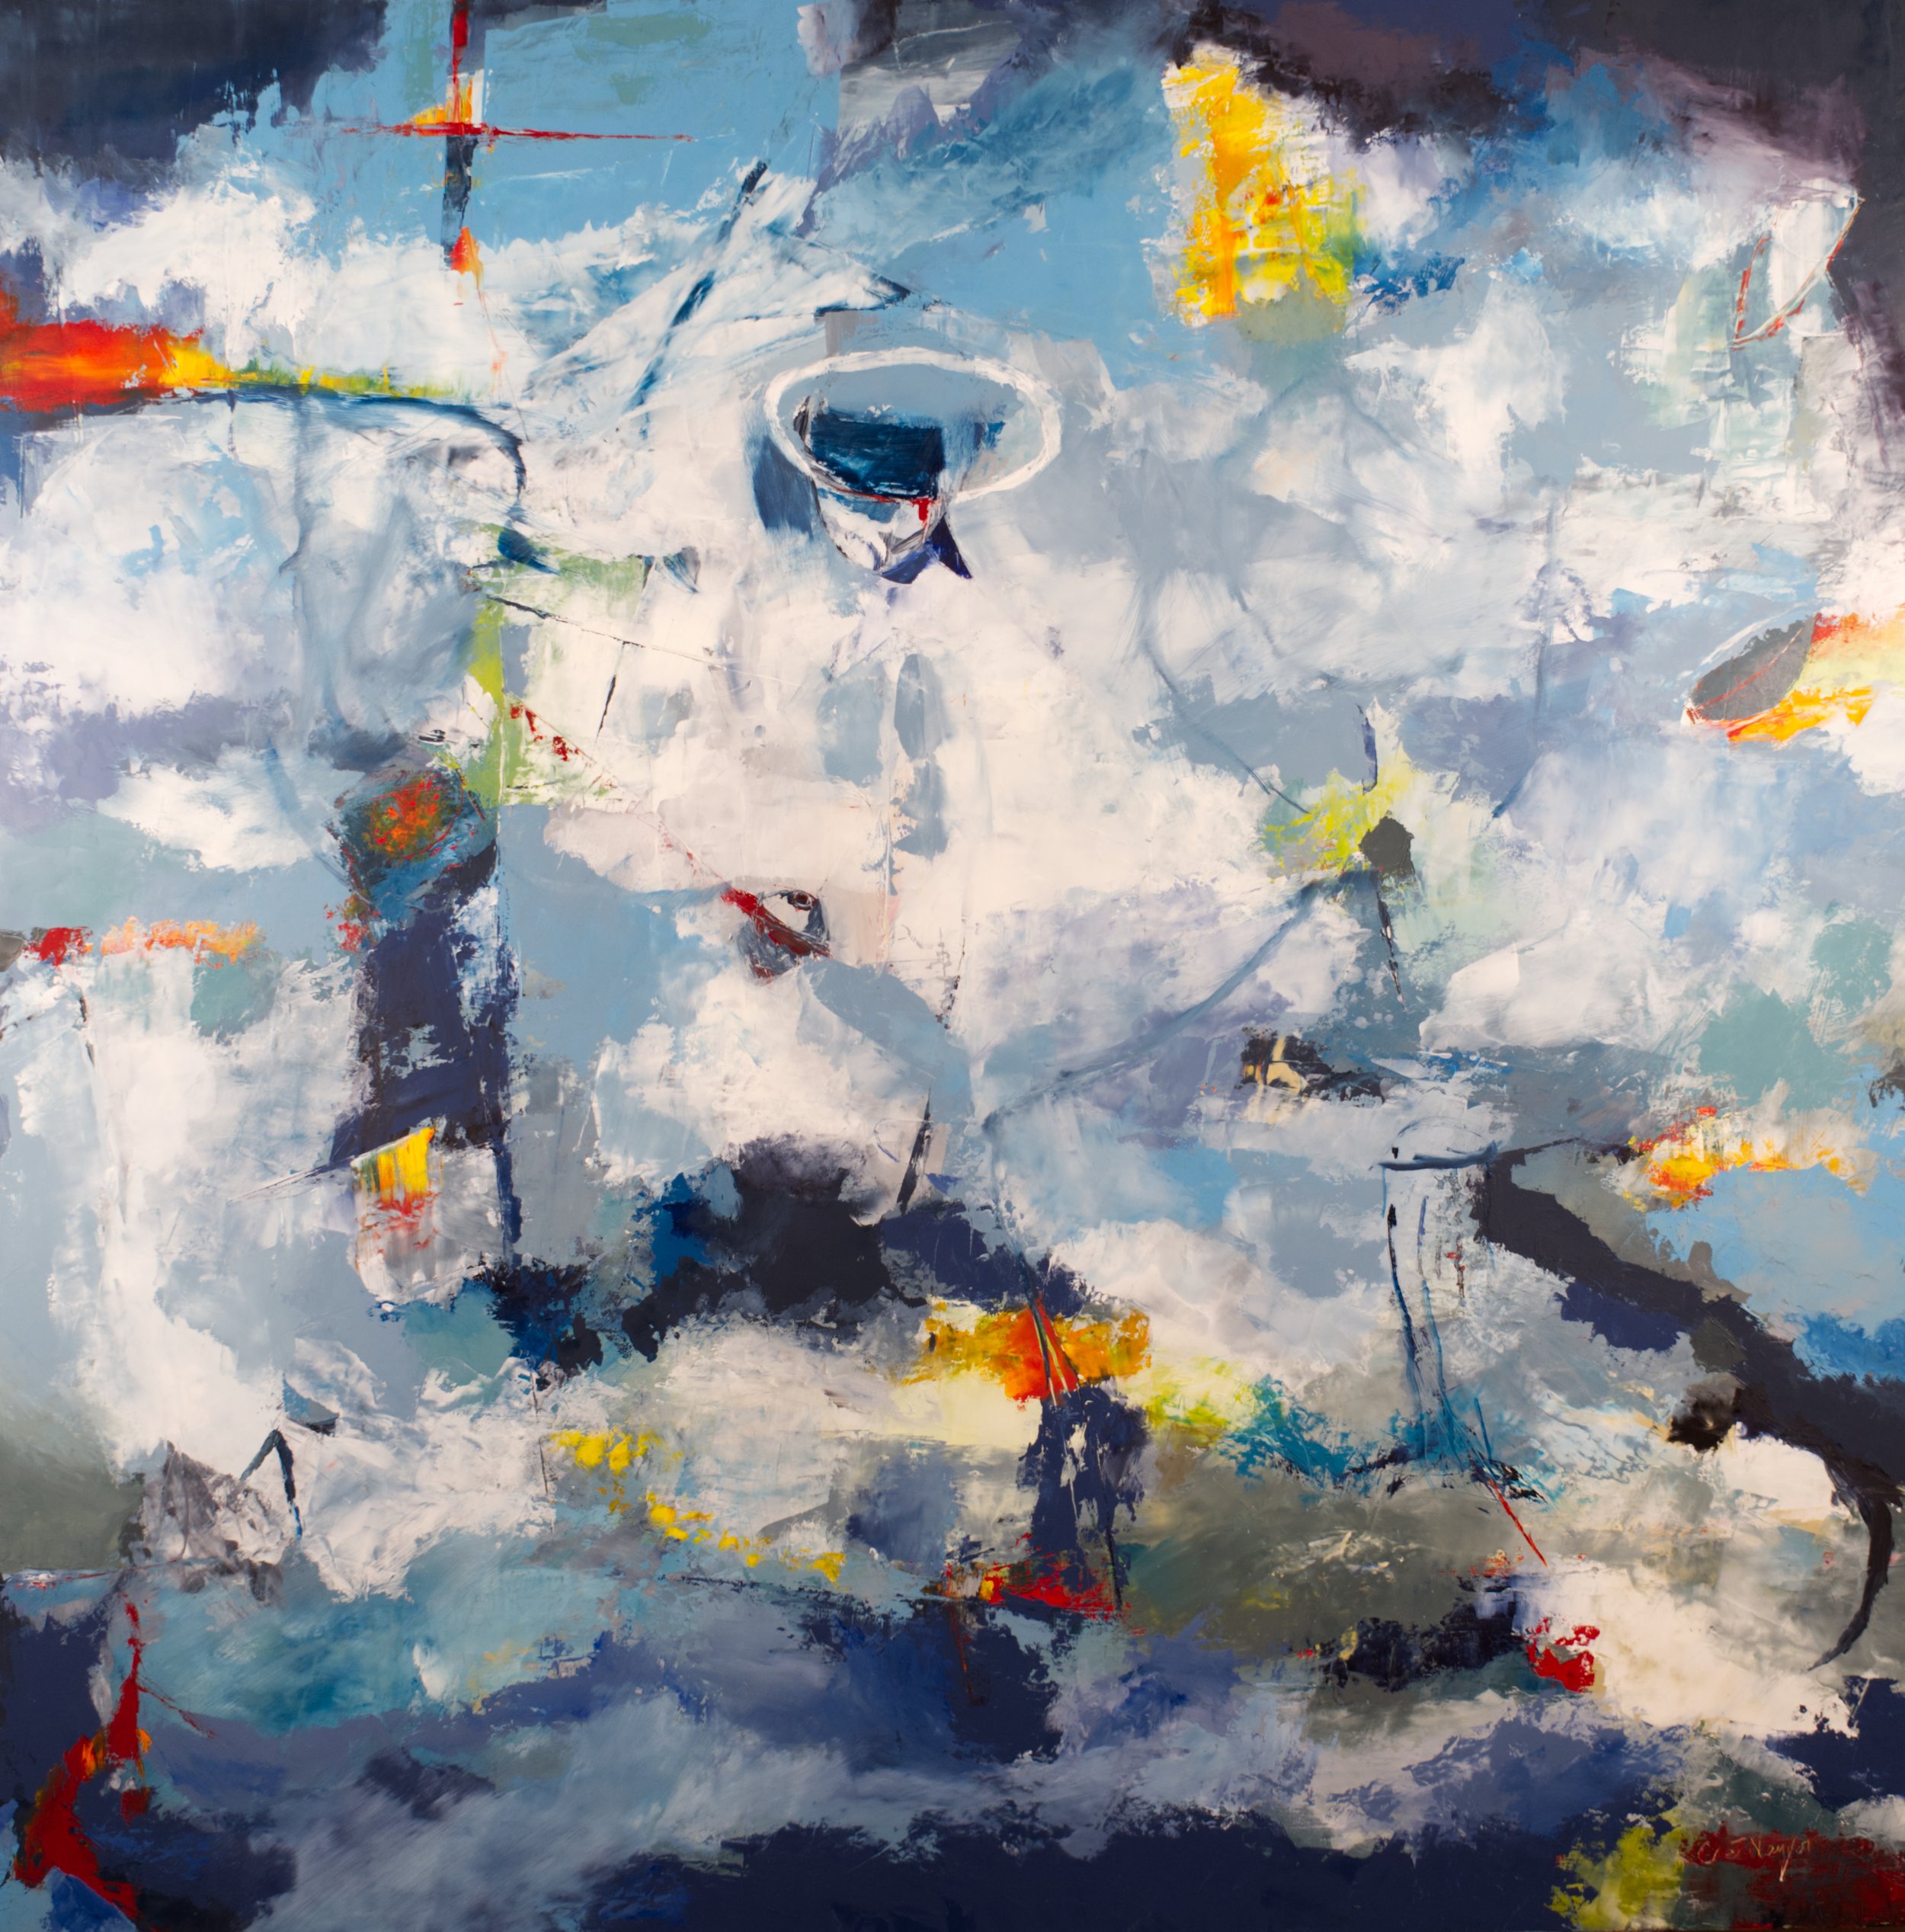  Transfiguration Oil  and cold wax on panel 48 x 48 inches 